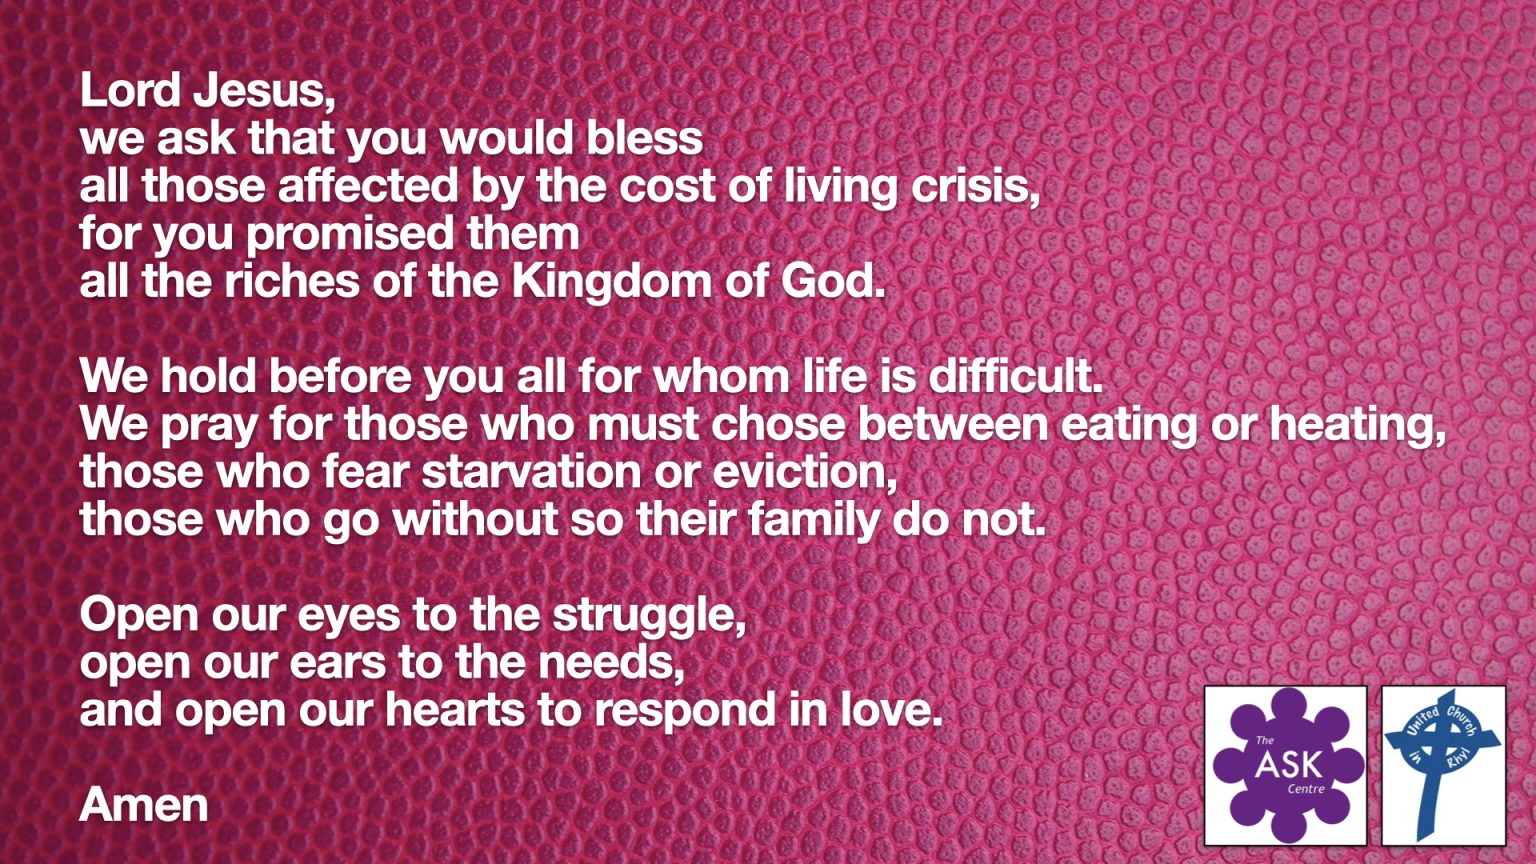 Prayer for those affected by the cost of living The United Church in Rhyl